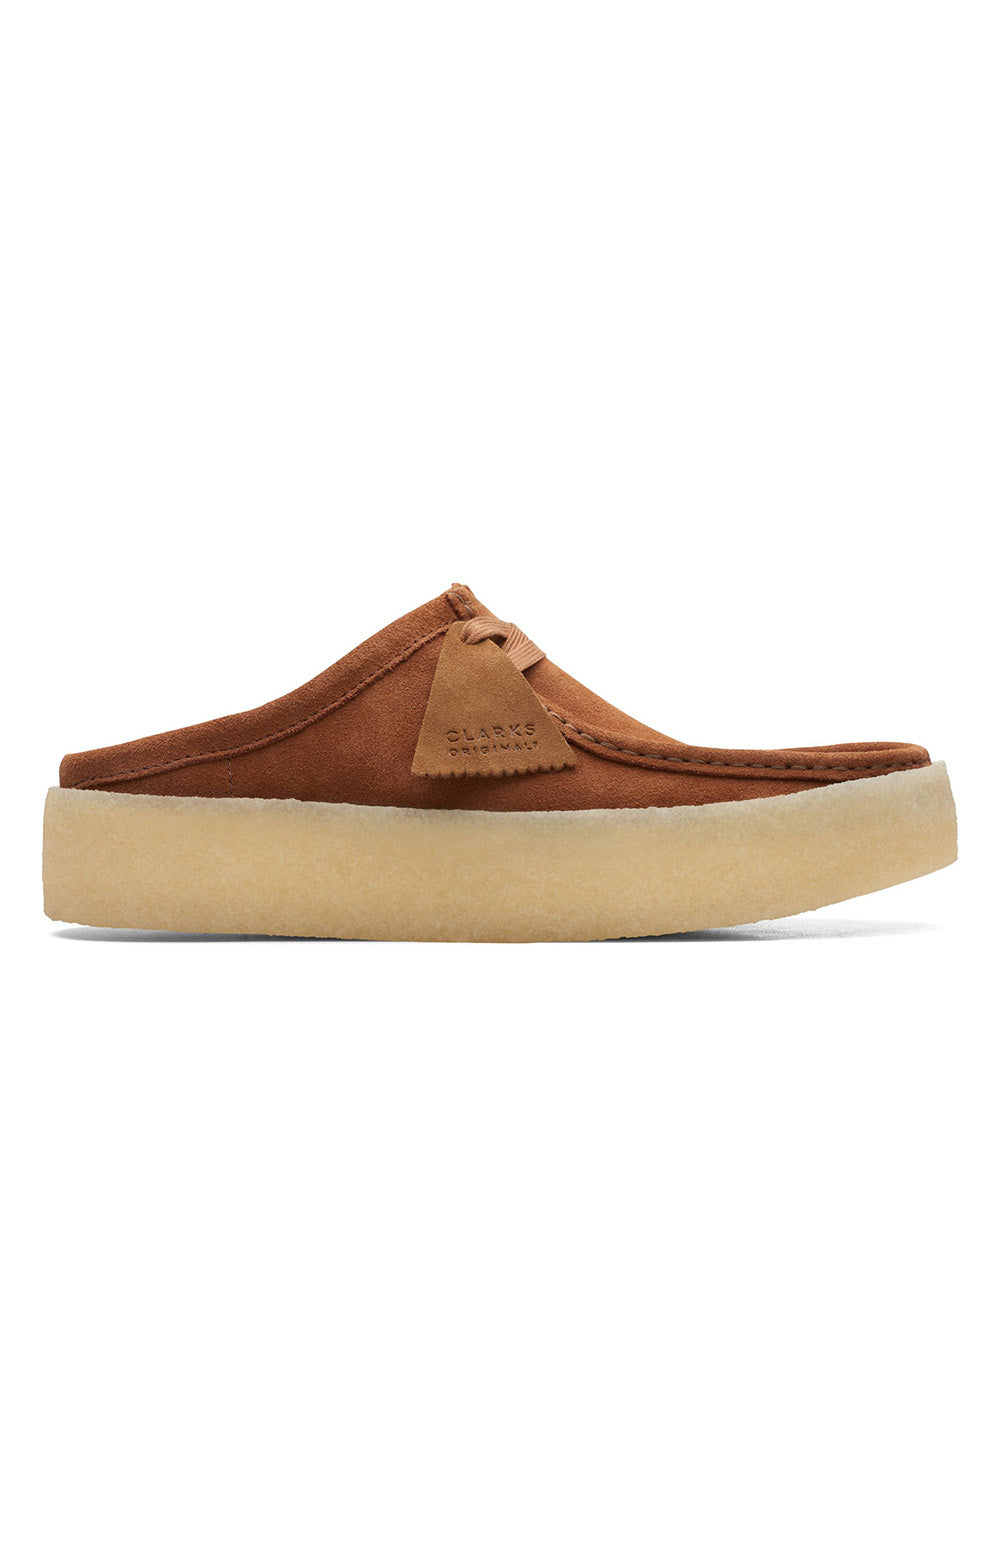 Clarks Originals Wallabee Cup Low Men's Tan Suede 26167287 shoe from the front angle